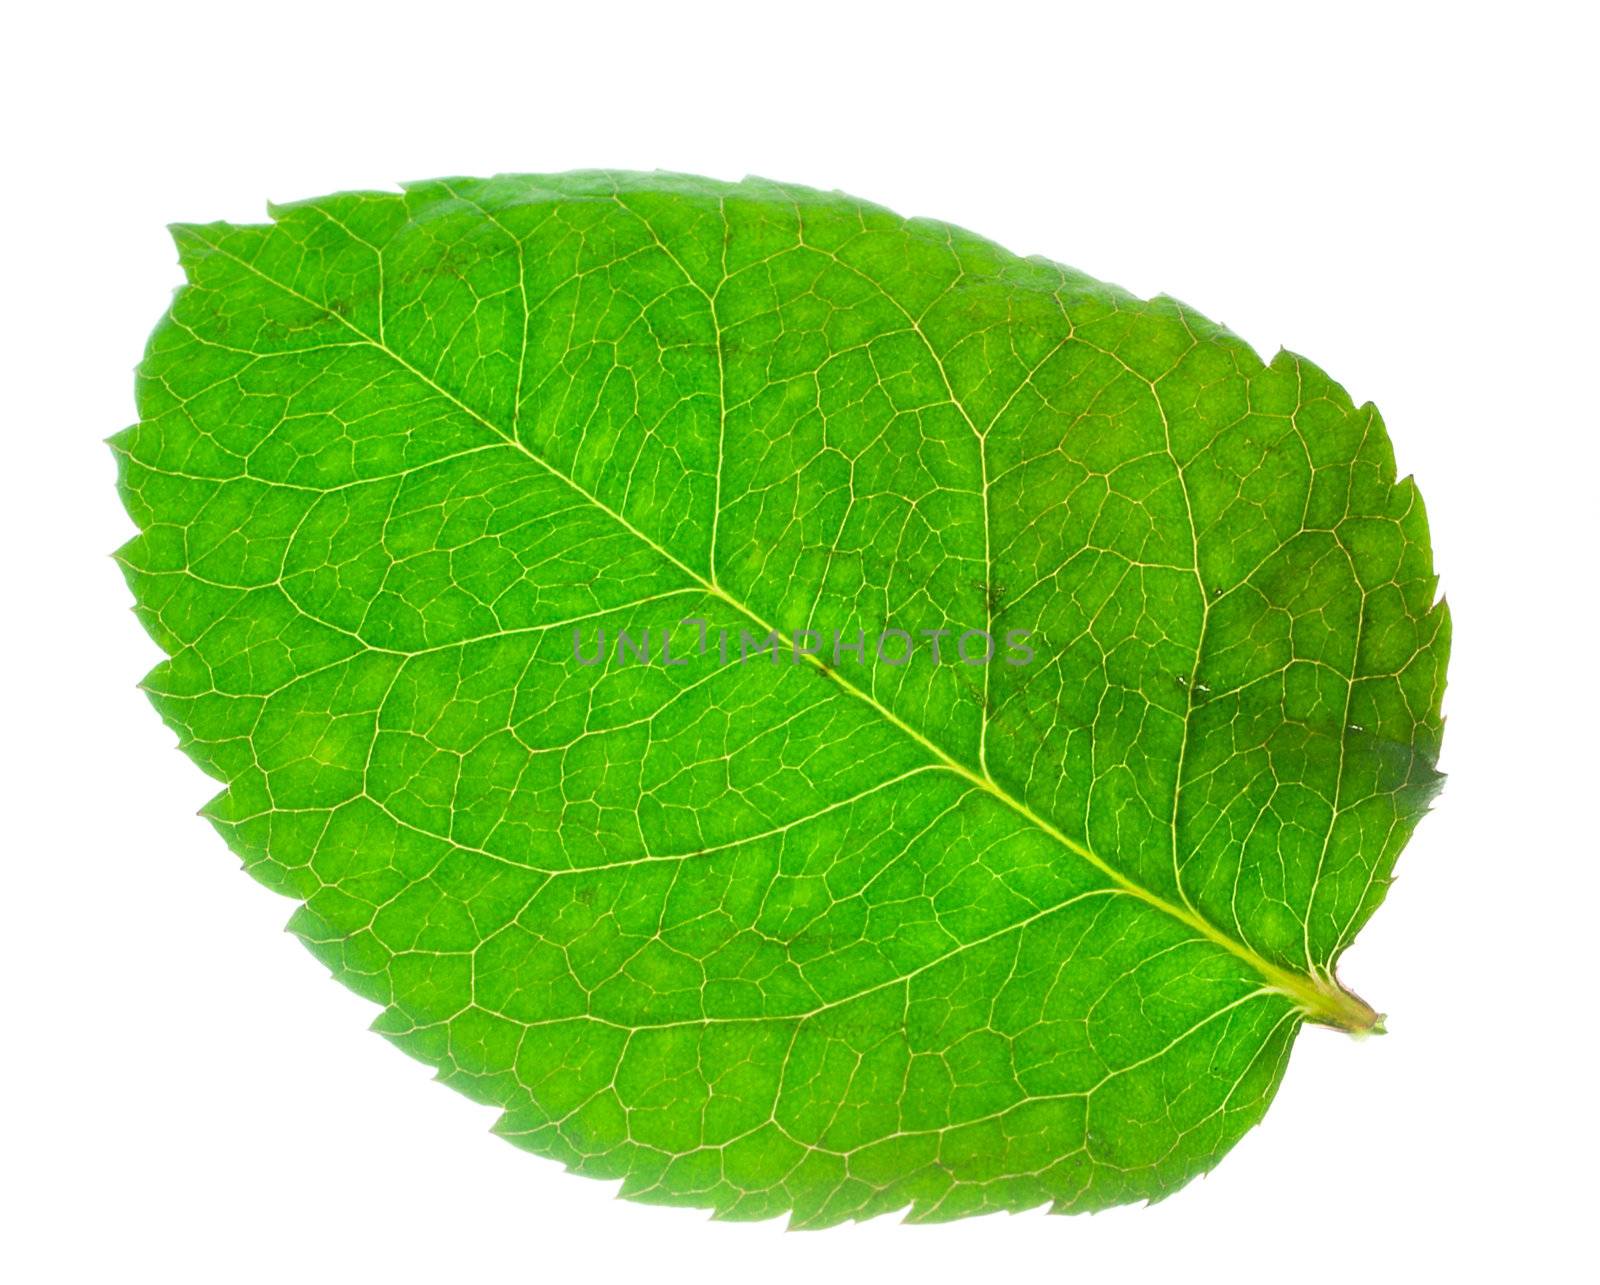 close-up green leaf from rose, isolated on white